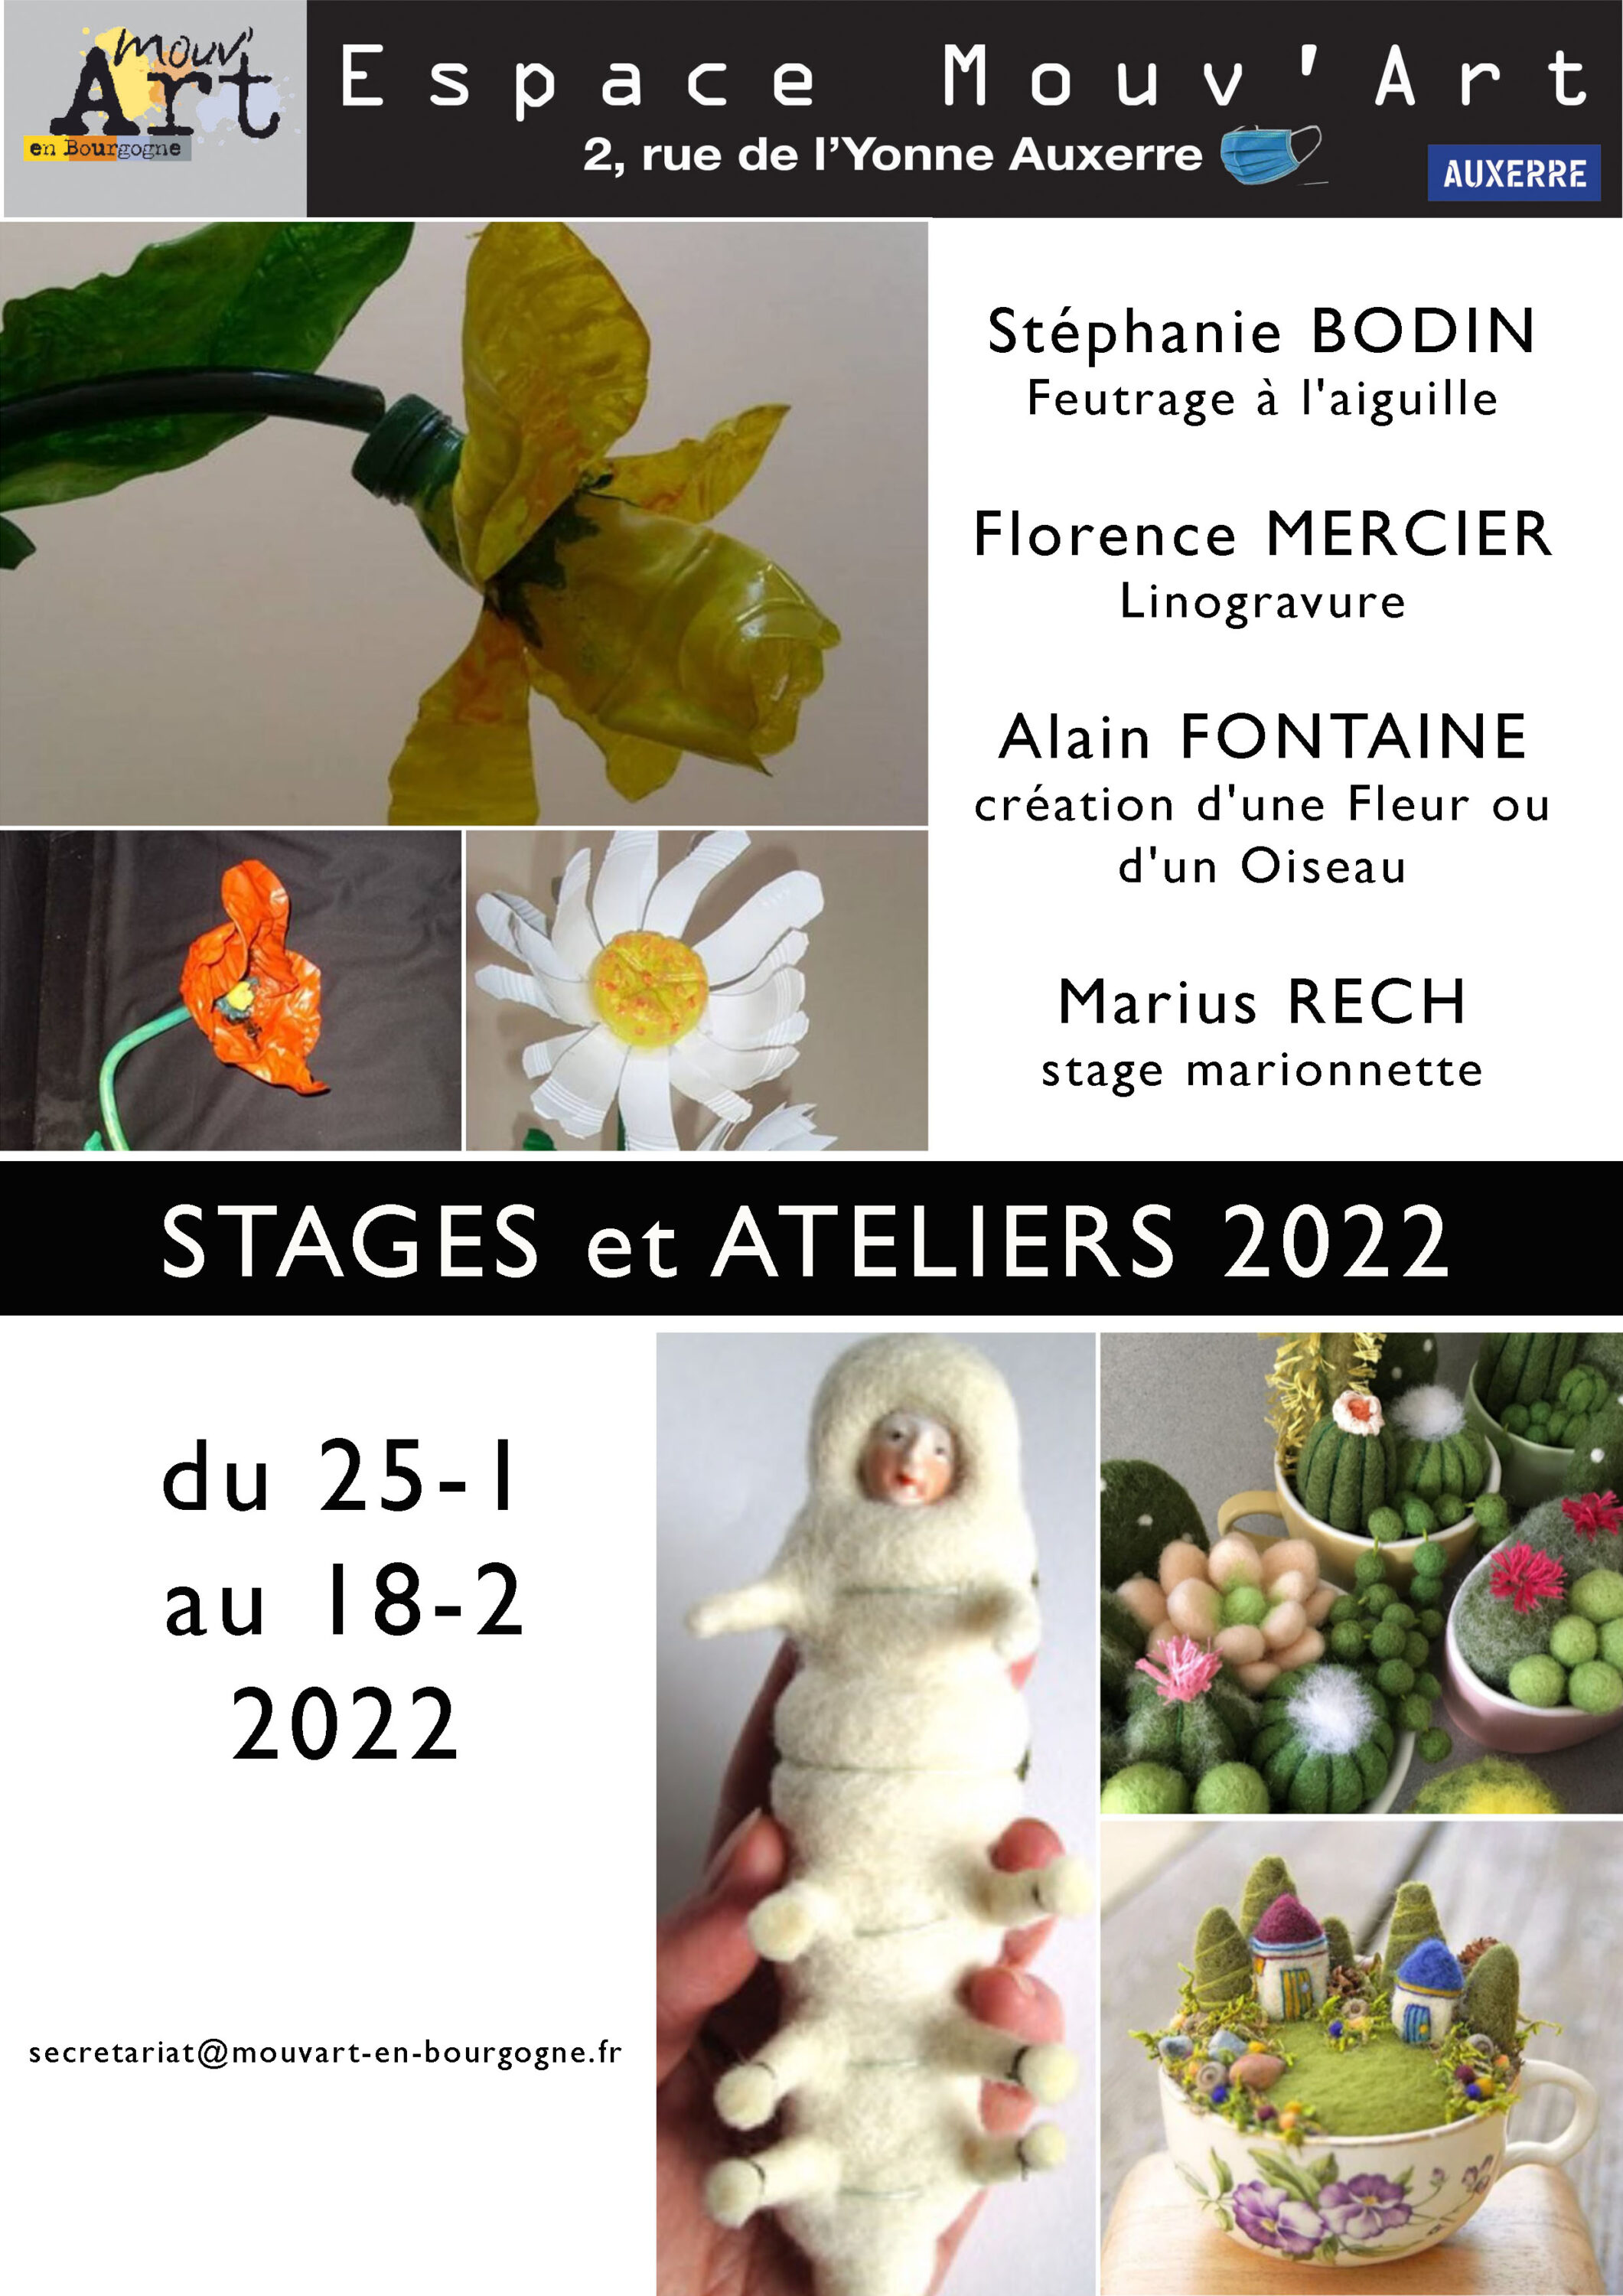 STAGES et ATELIERS 2022